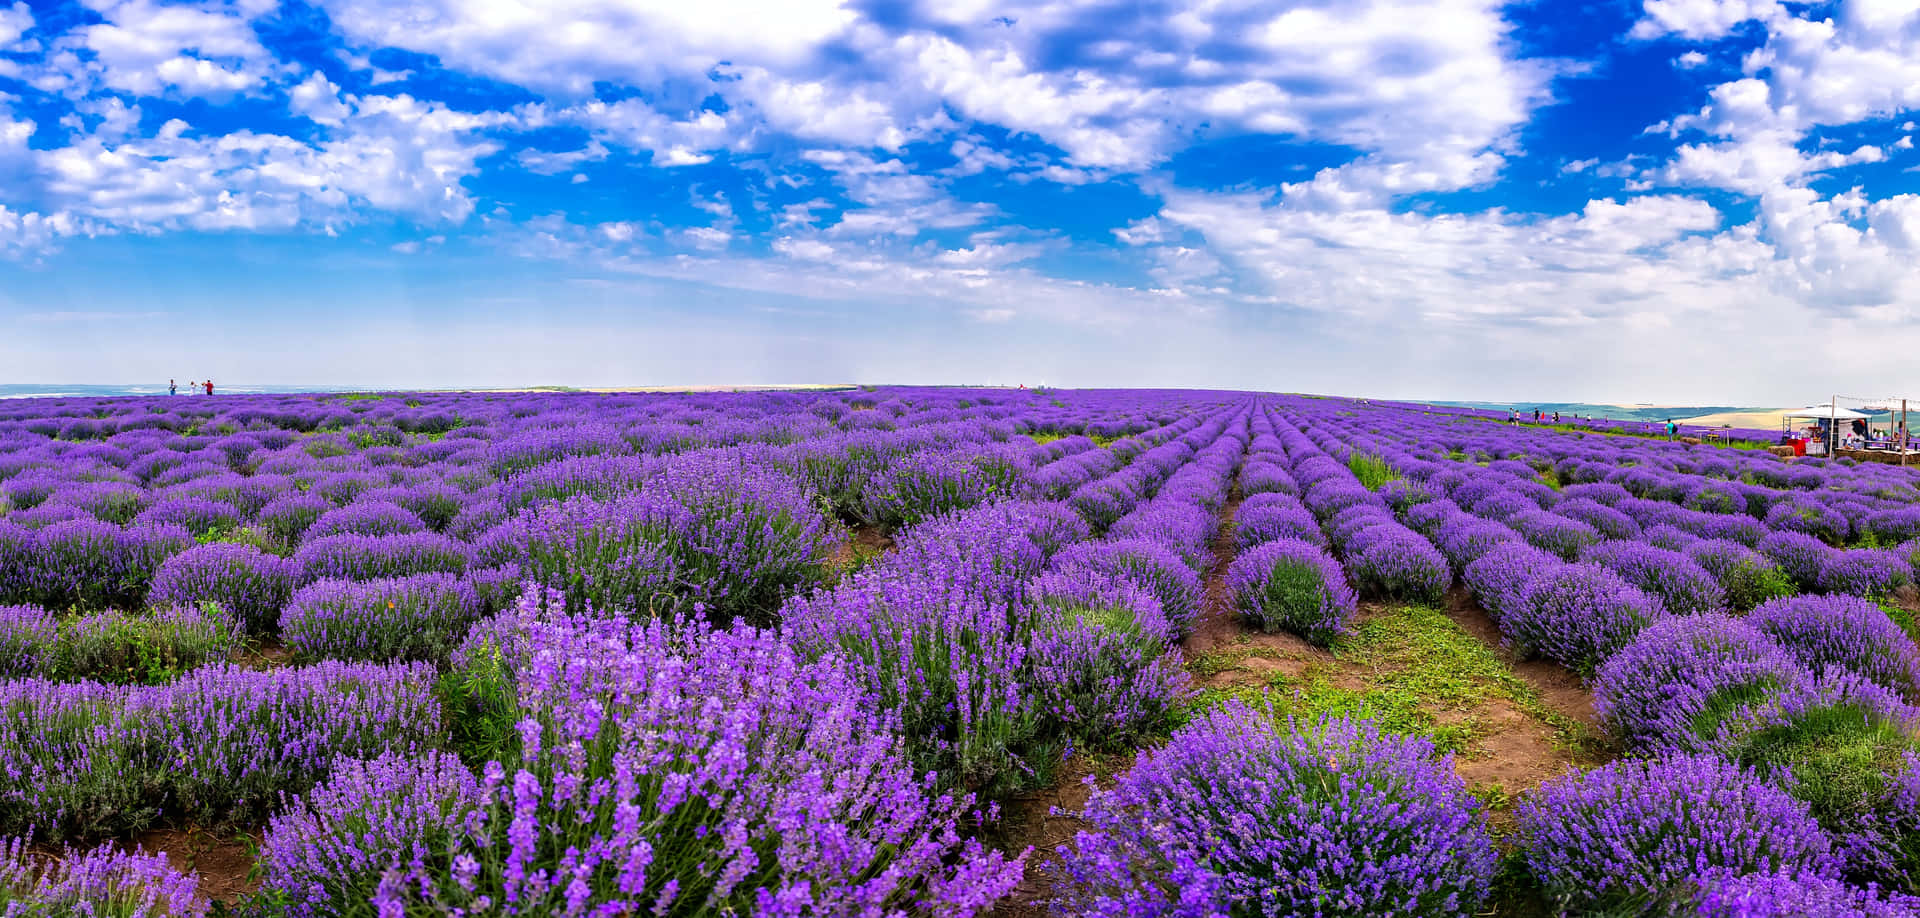 Image   Soaking Up the Beauty of a Lavender Field